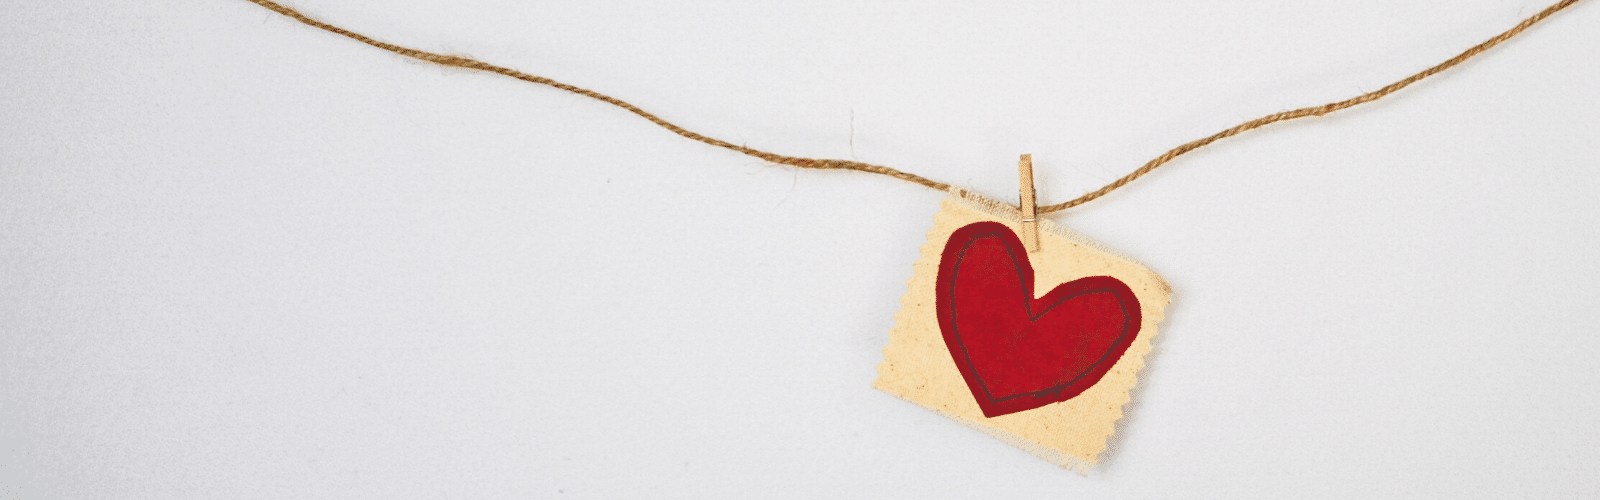 5 DIY ideas to celebrate Valentine's Day with your kids!